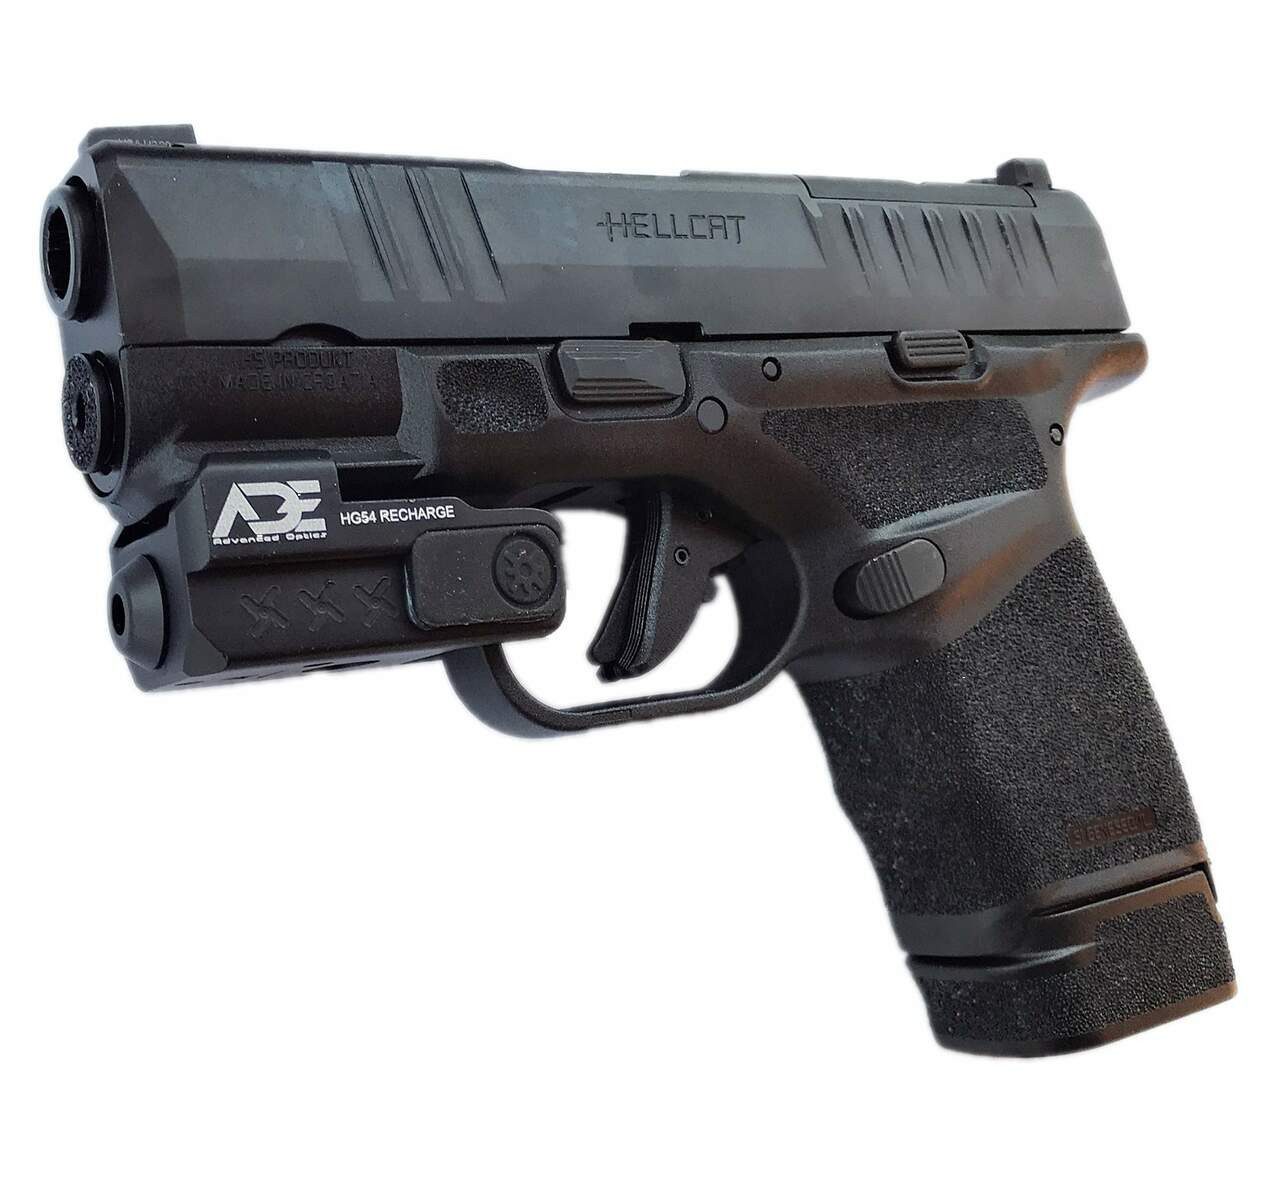 SUPER Ultra COMPACT Pistol RED Laser Sight for All full size and sub-compact handguns